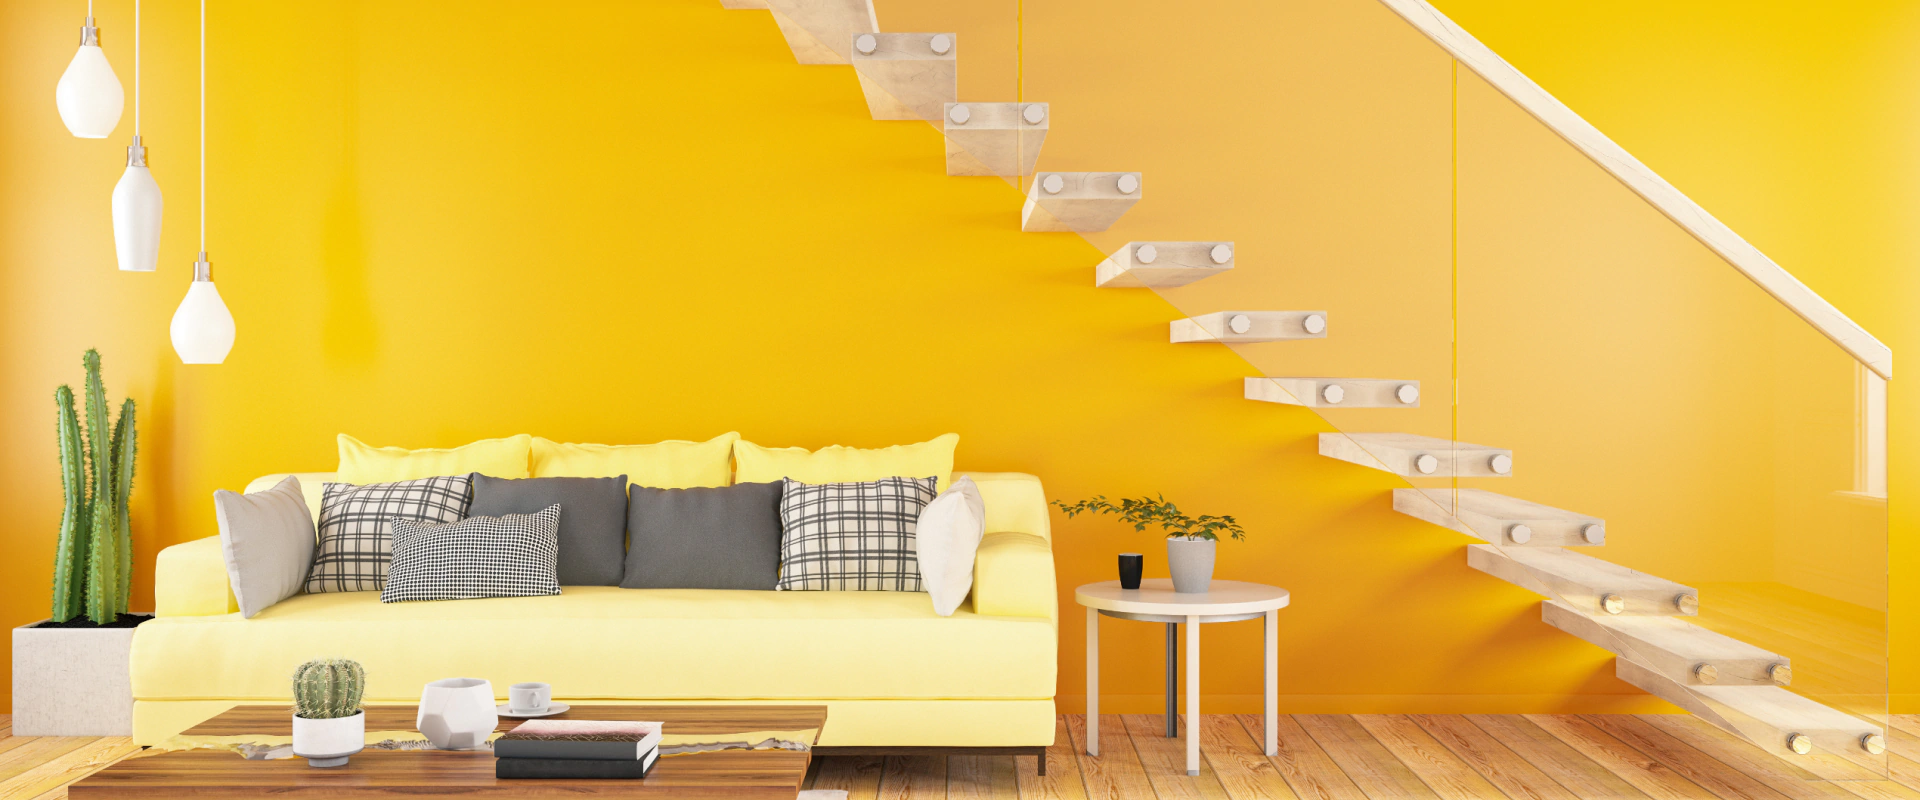 hero yellow wall and couch under floating stairs